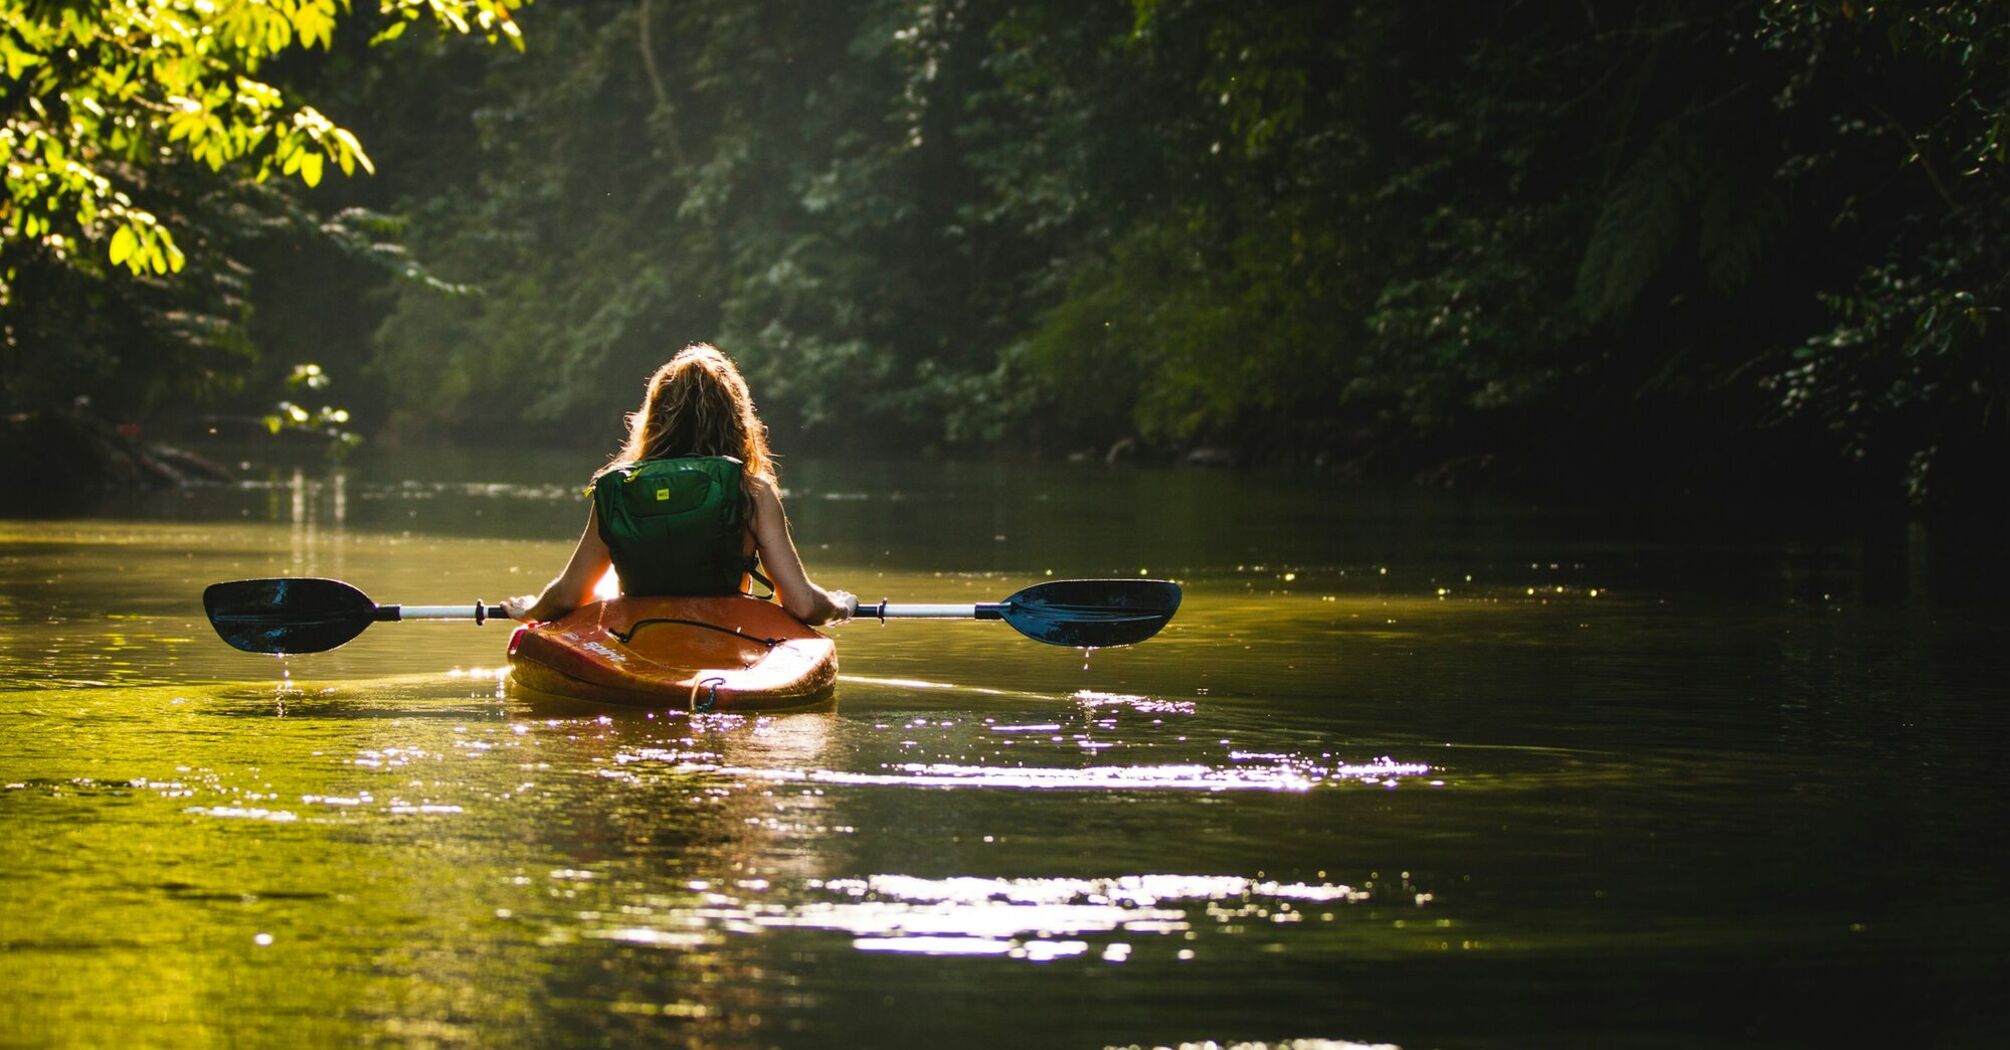 Woman kayaking through a serene, forested river with sunlight filtering through the trees